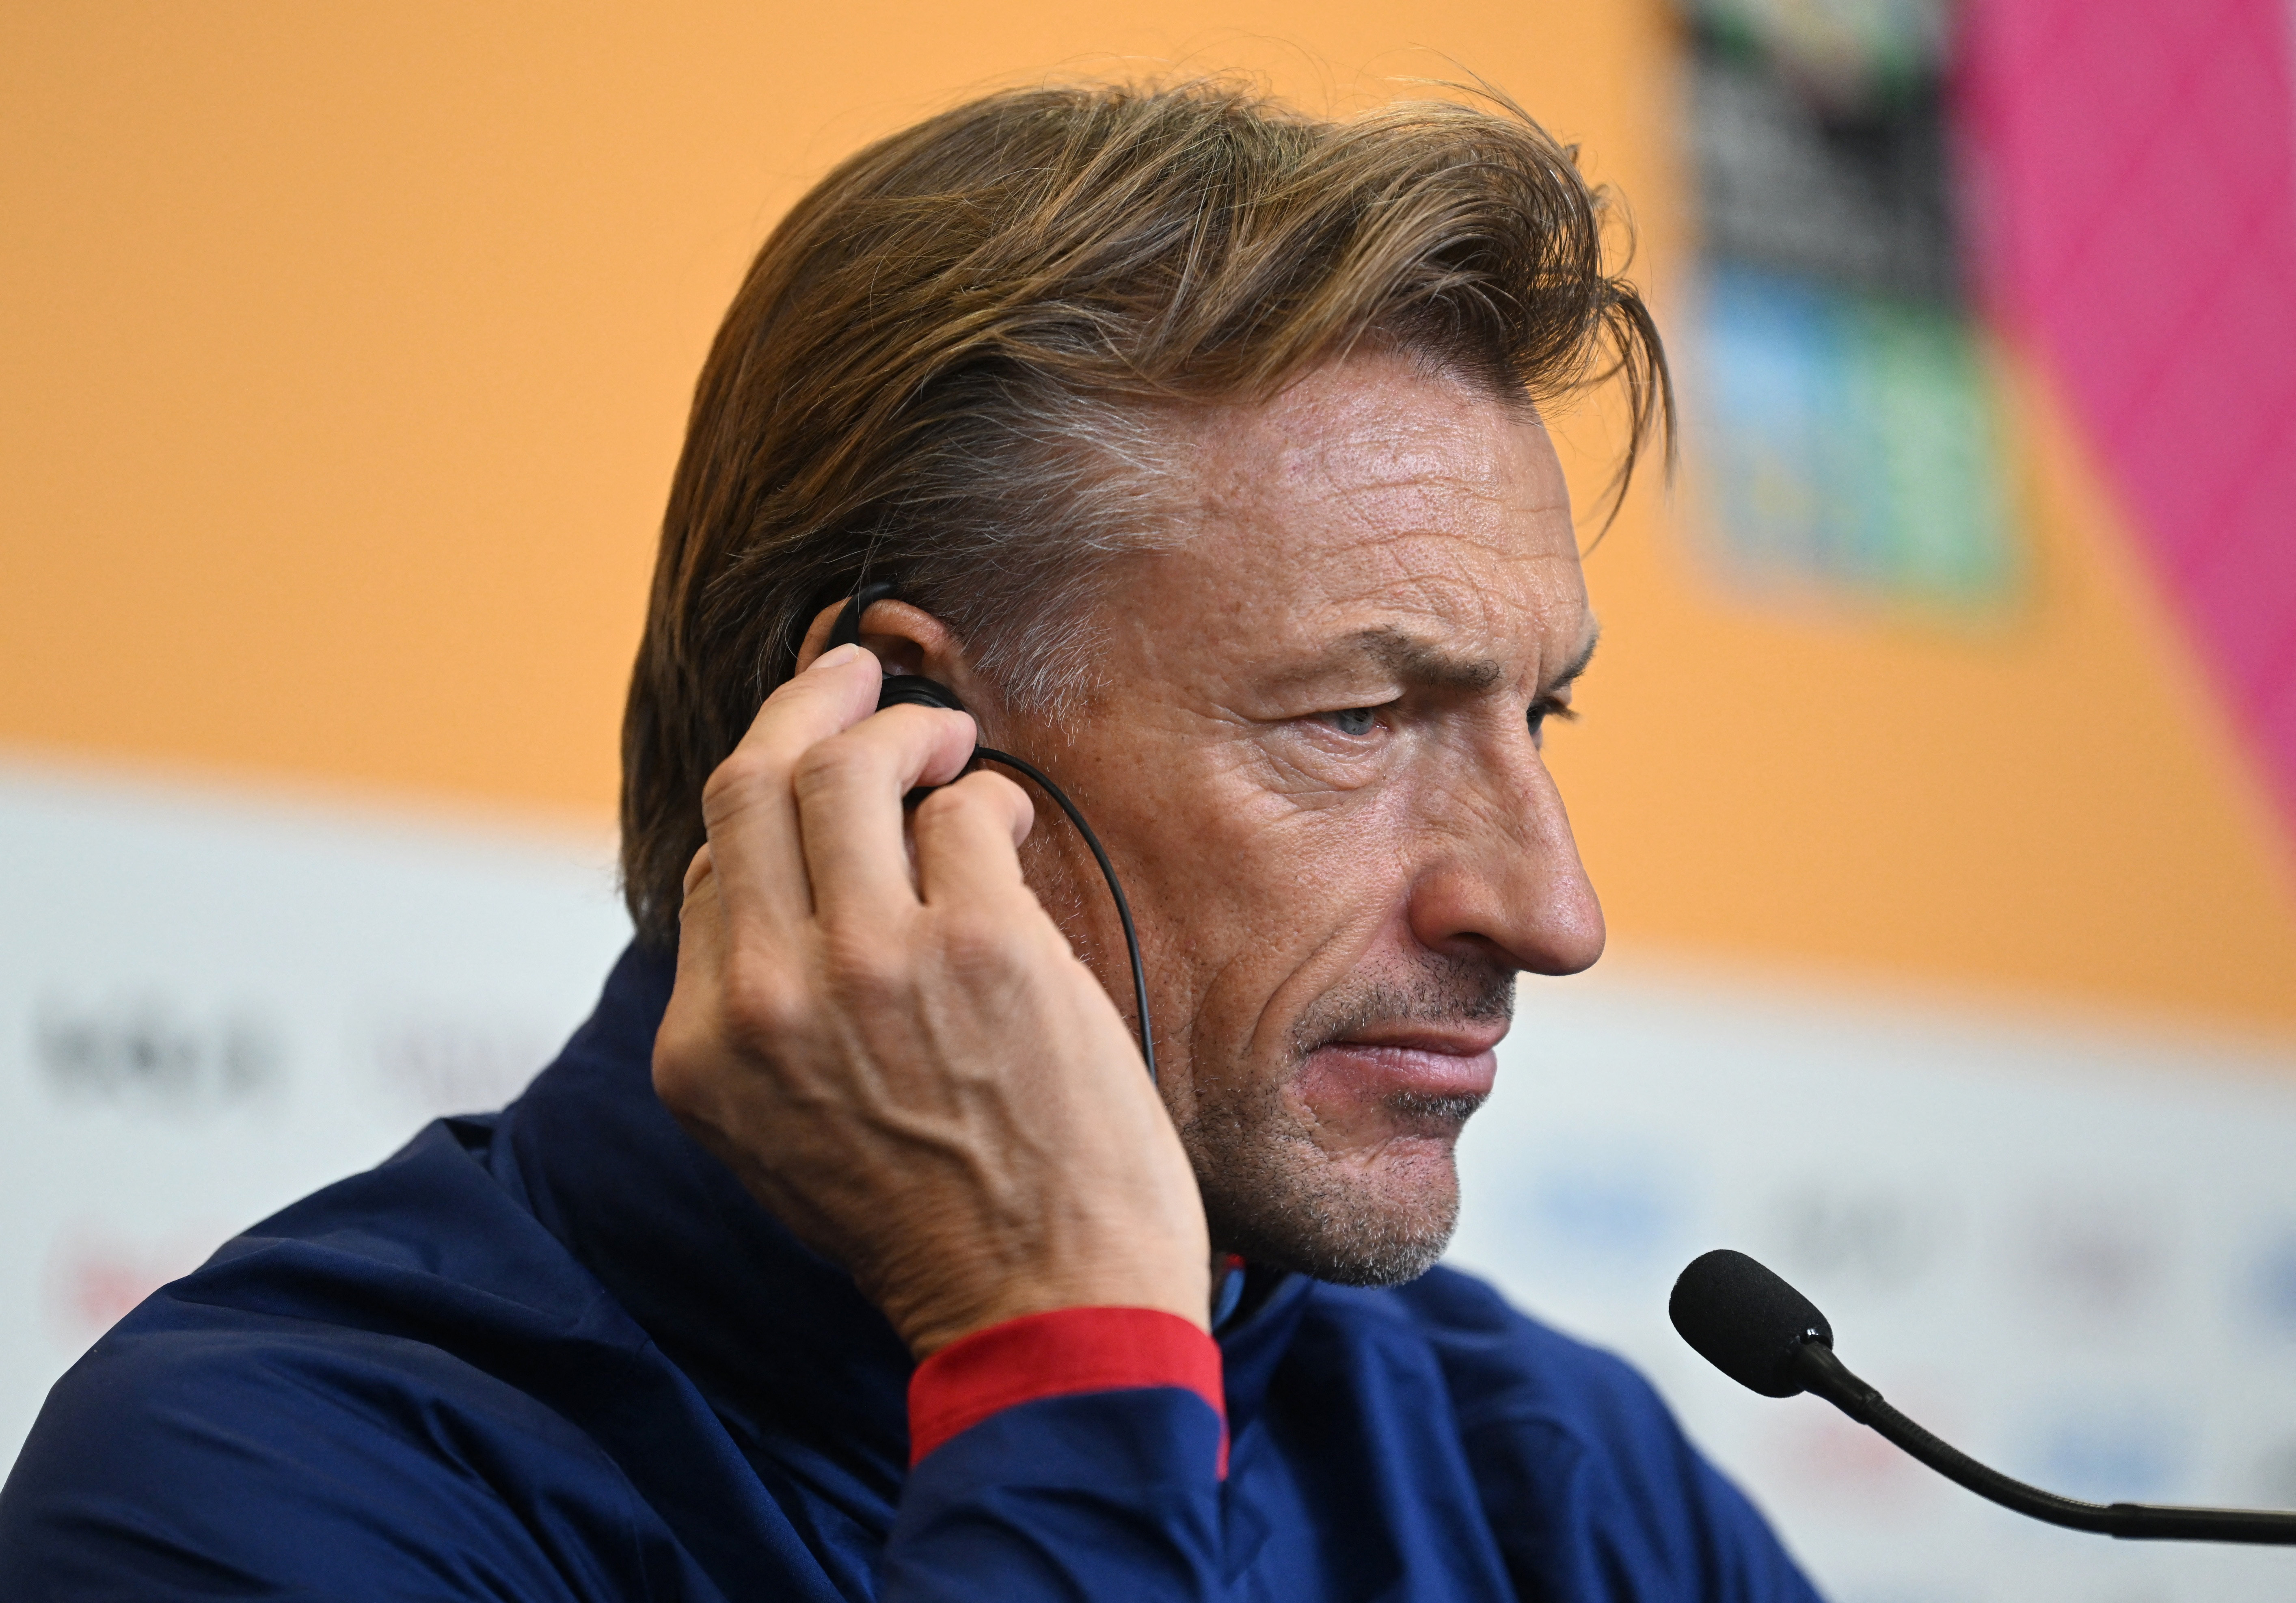 Herve Renard set to be announced as new France Women's head coach